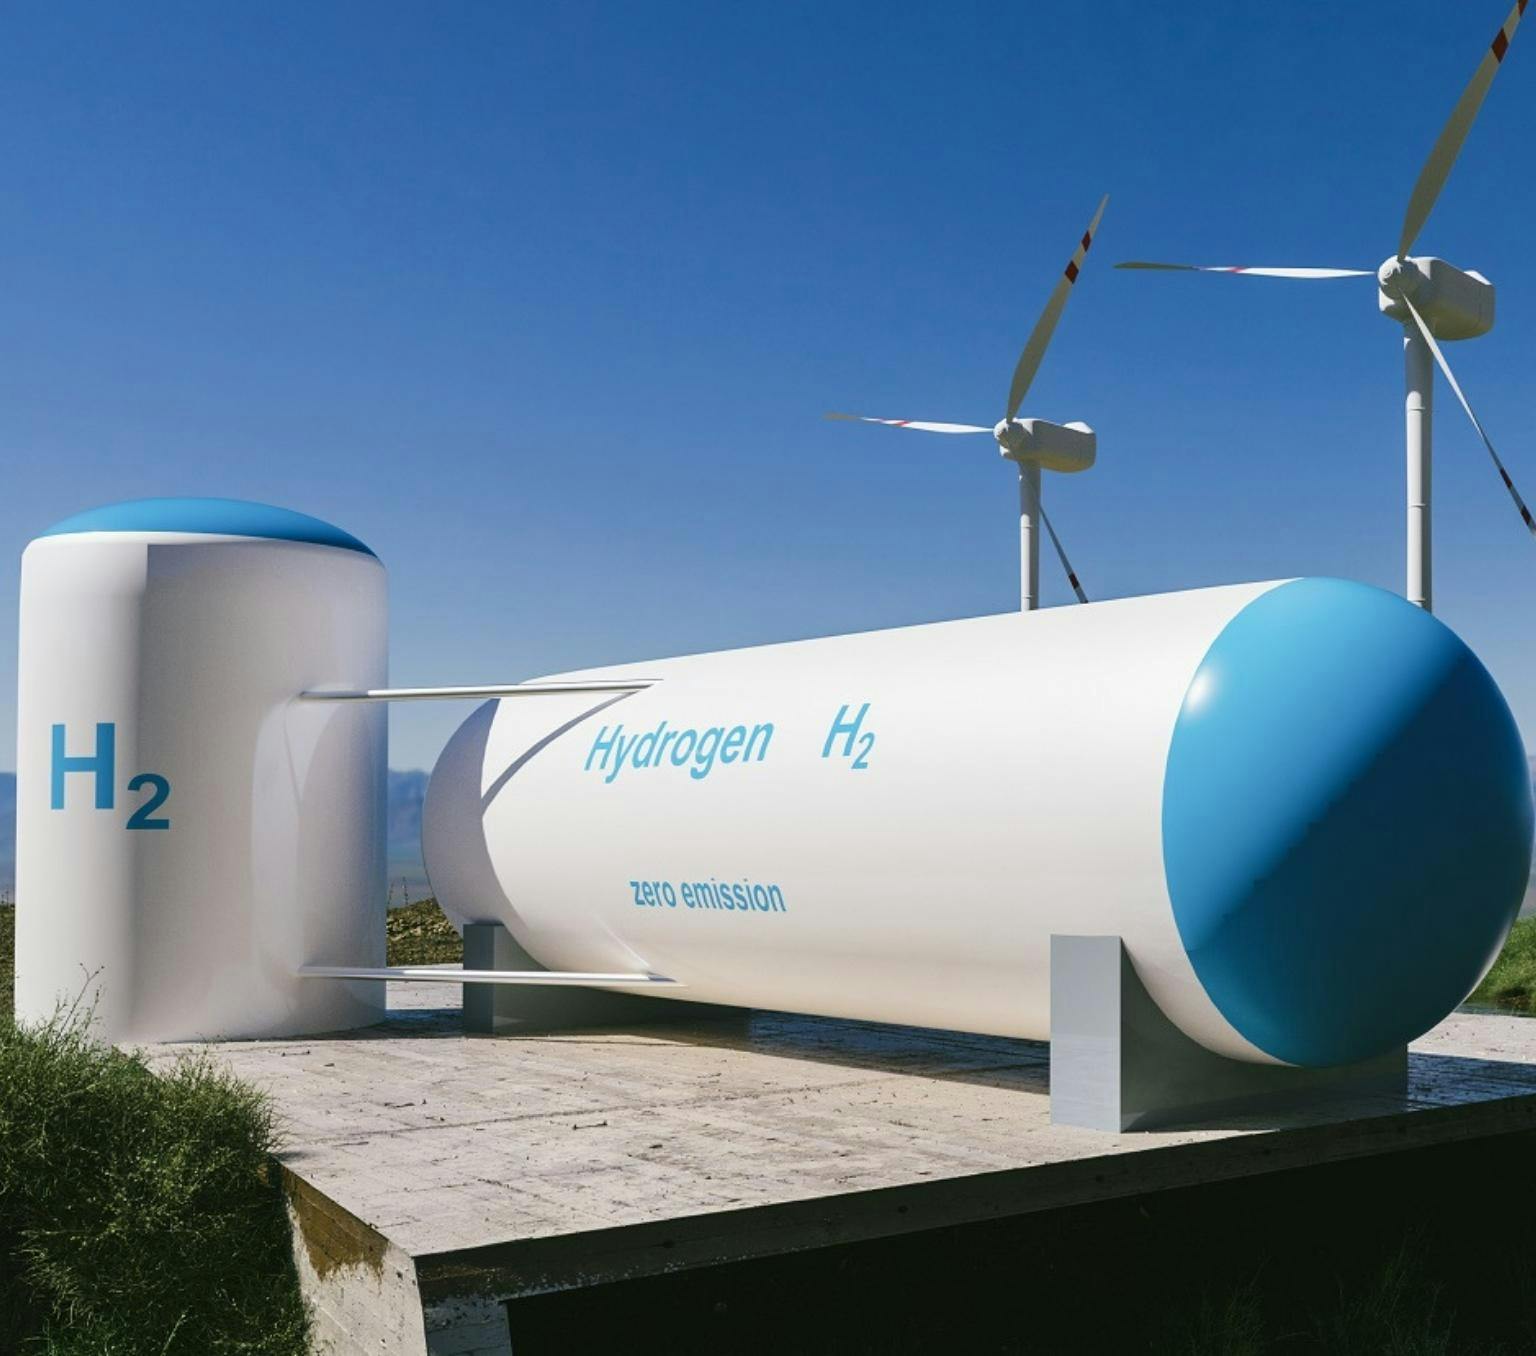 An artist's impression of a hydrogen energy plant, also showing solar panels and wind turbines